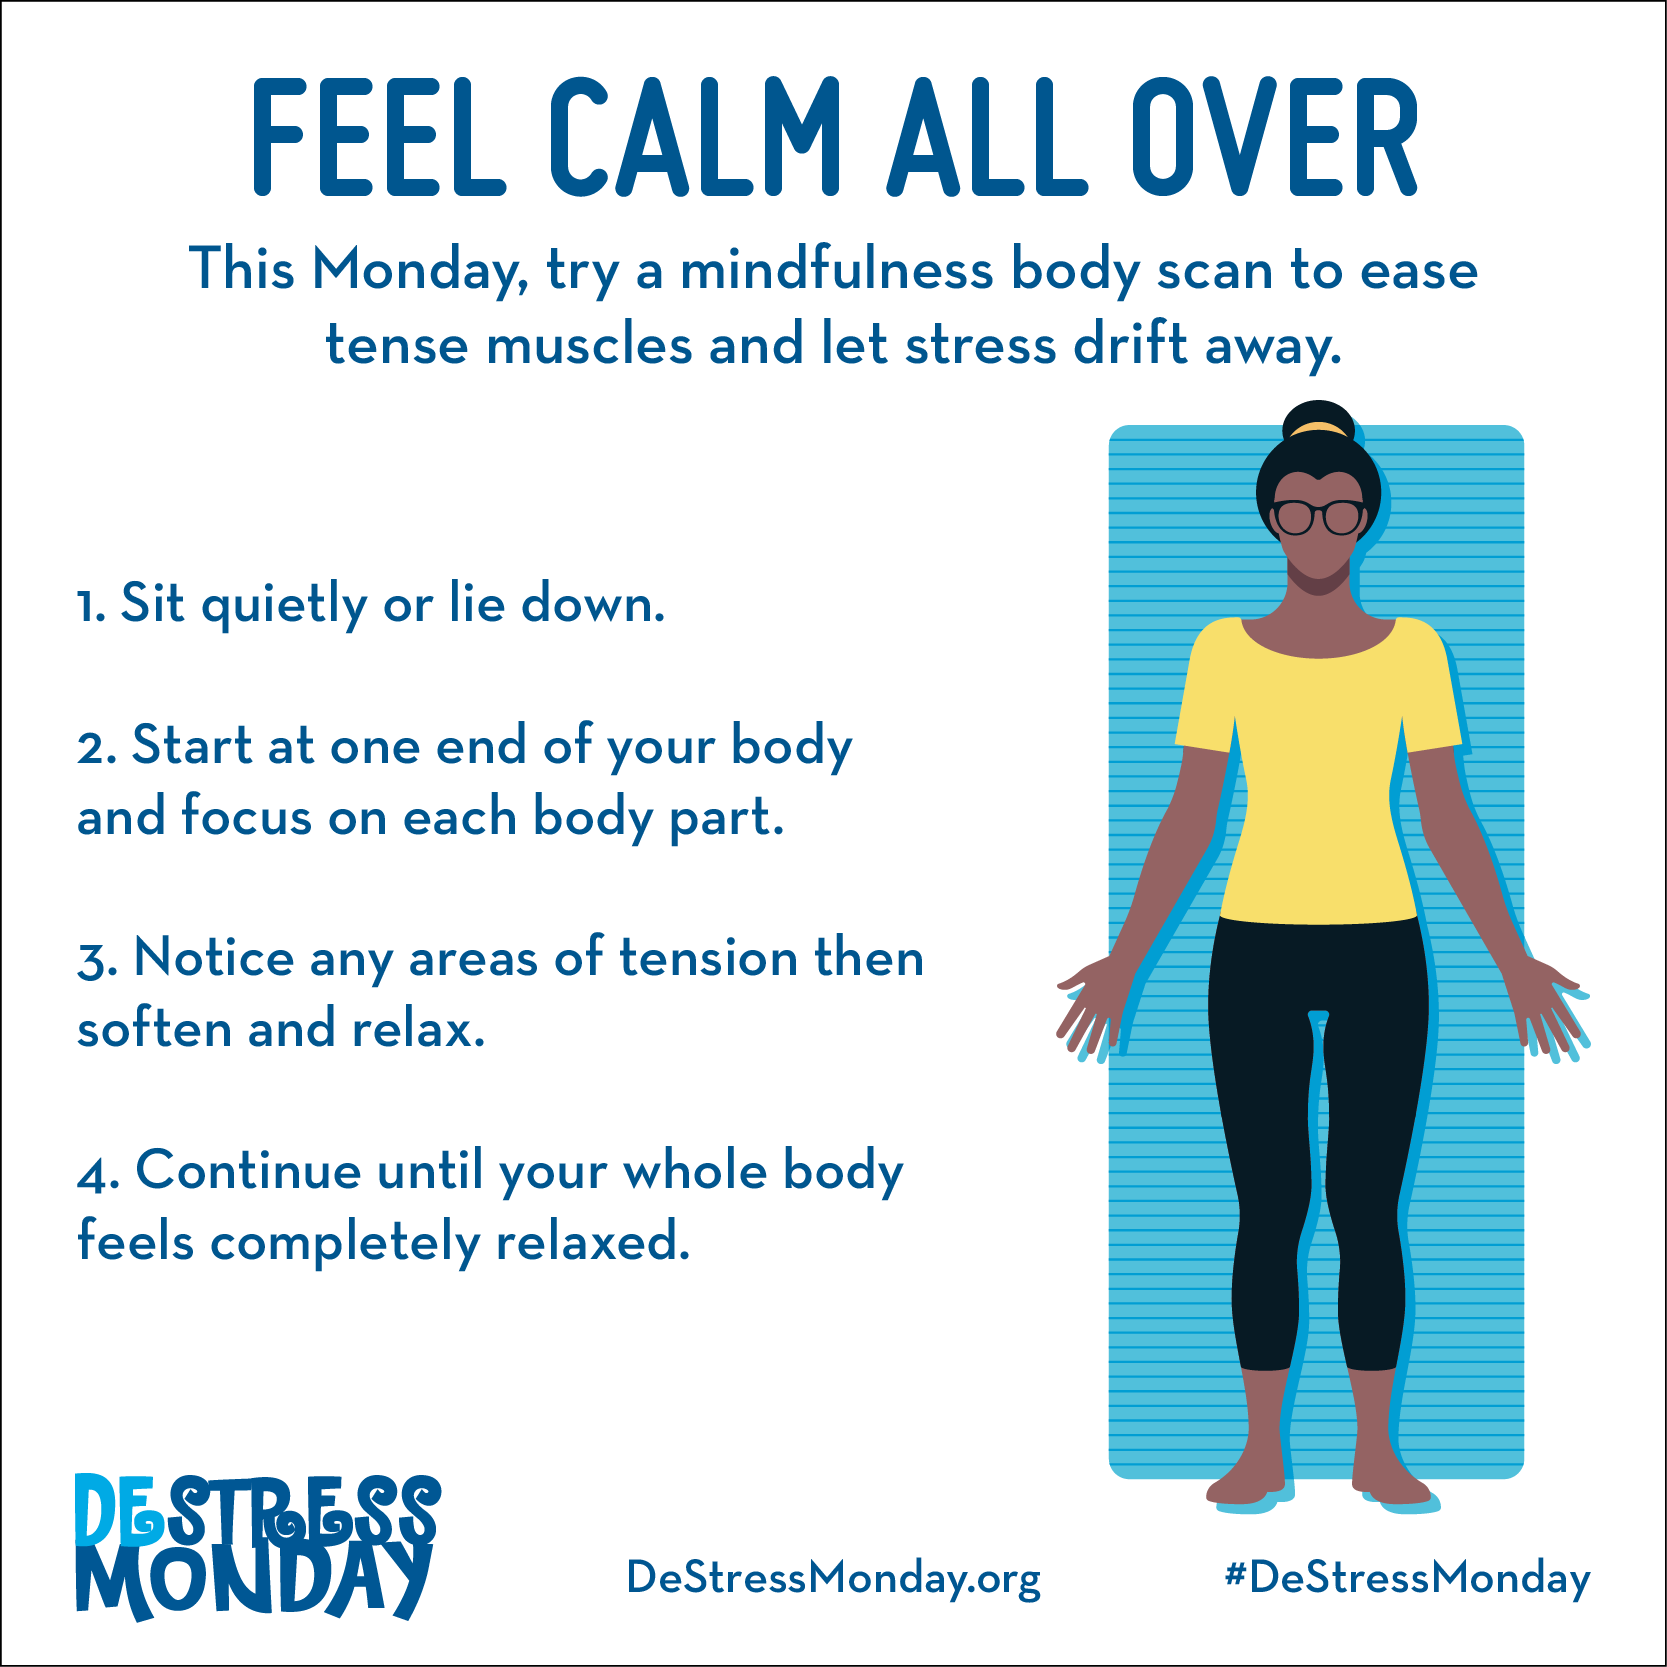 https://www.mondaycampaigns.org/wp-content/uploads/2020/03/destress-monday-mindfulness-graphic-body-scan.png